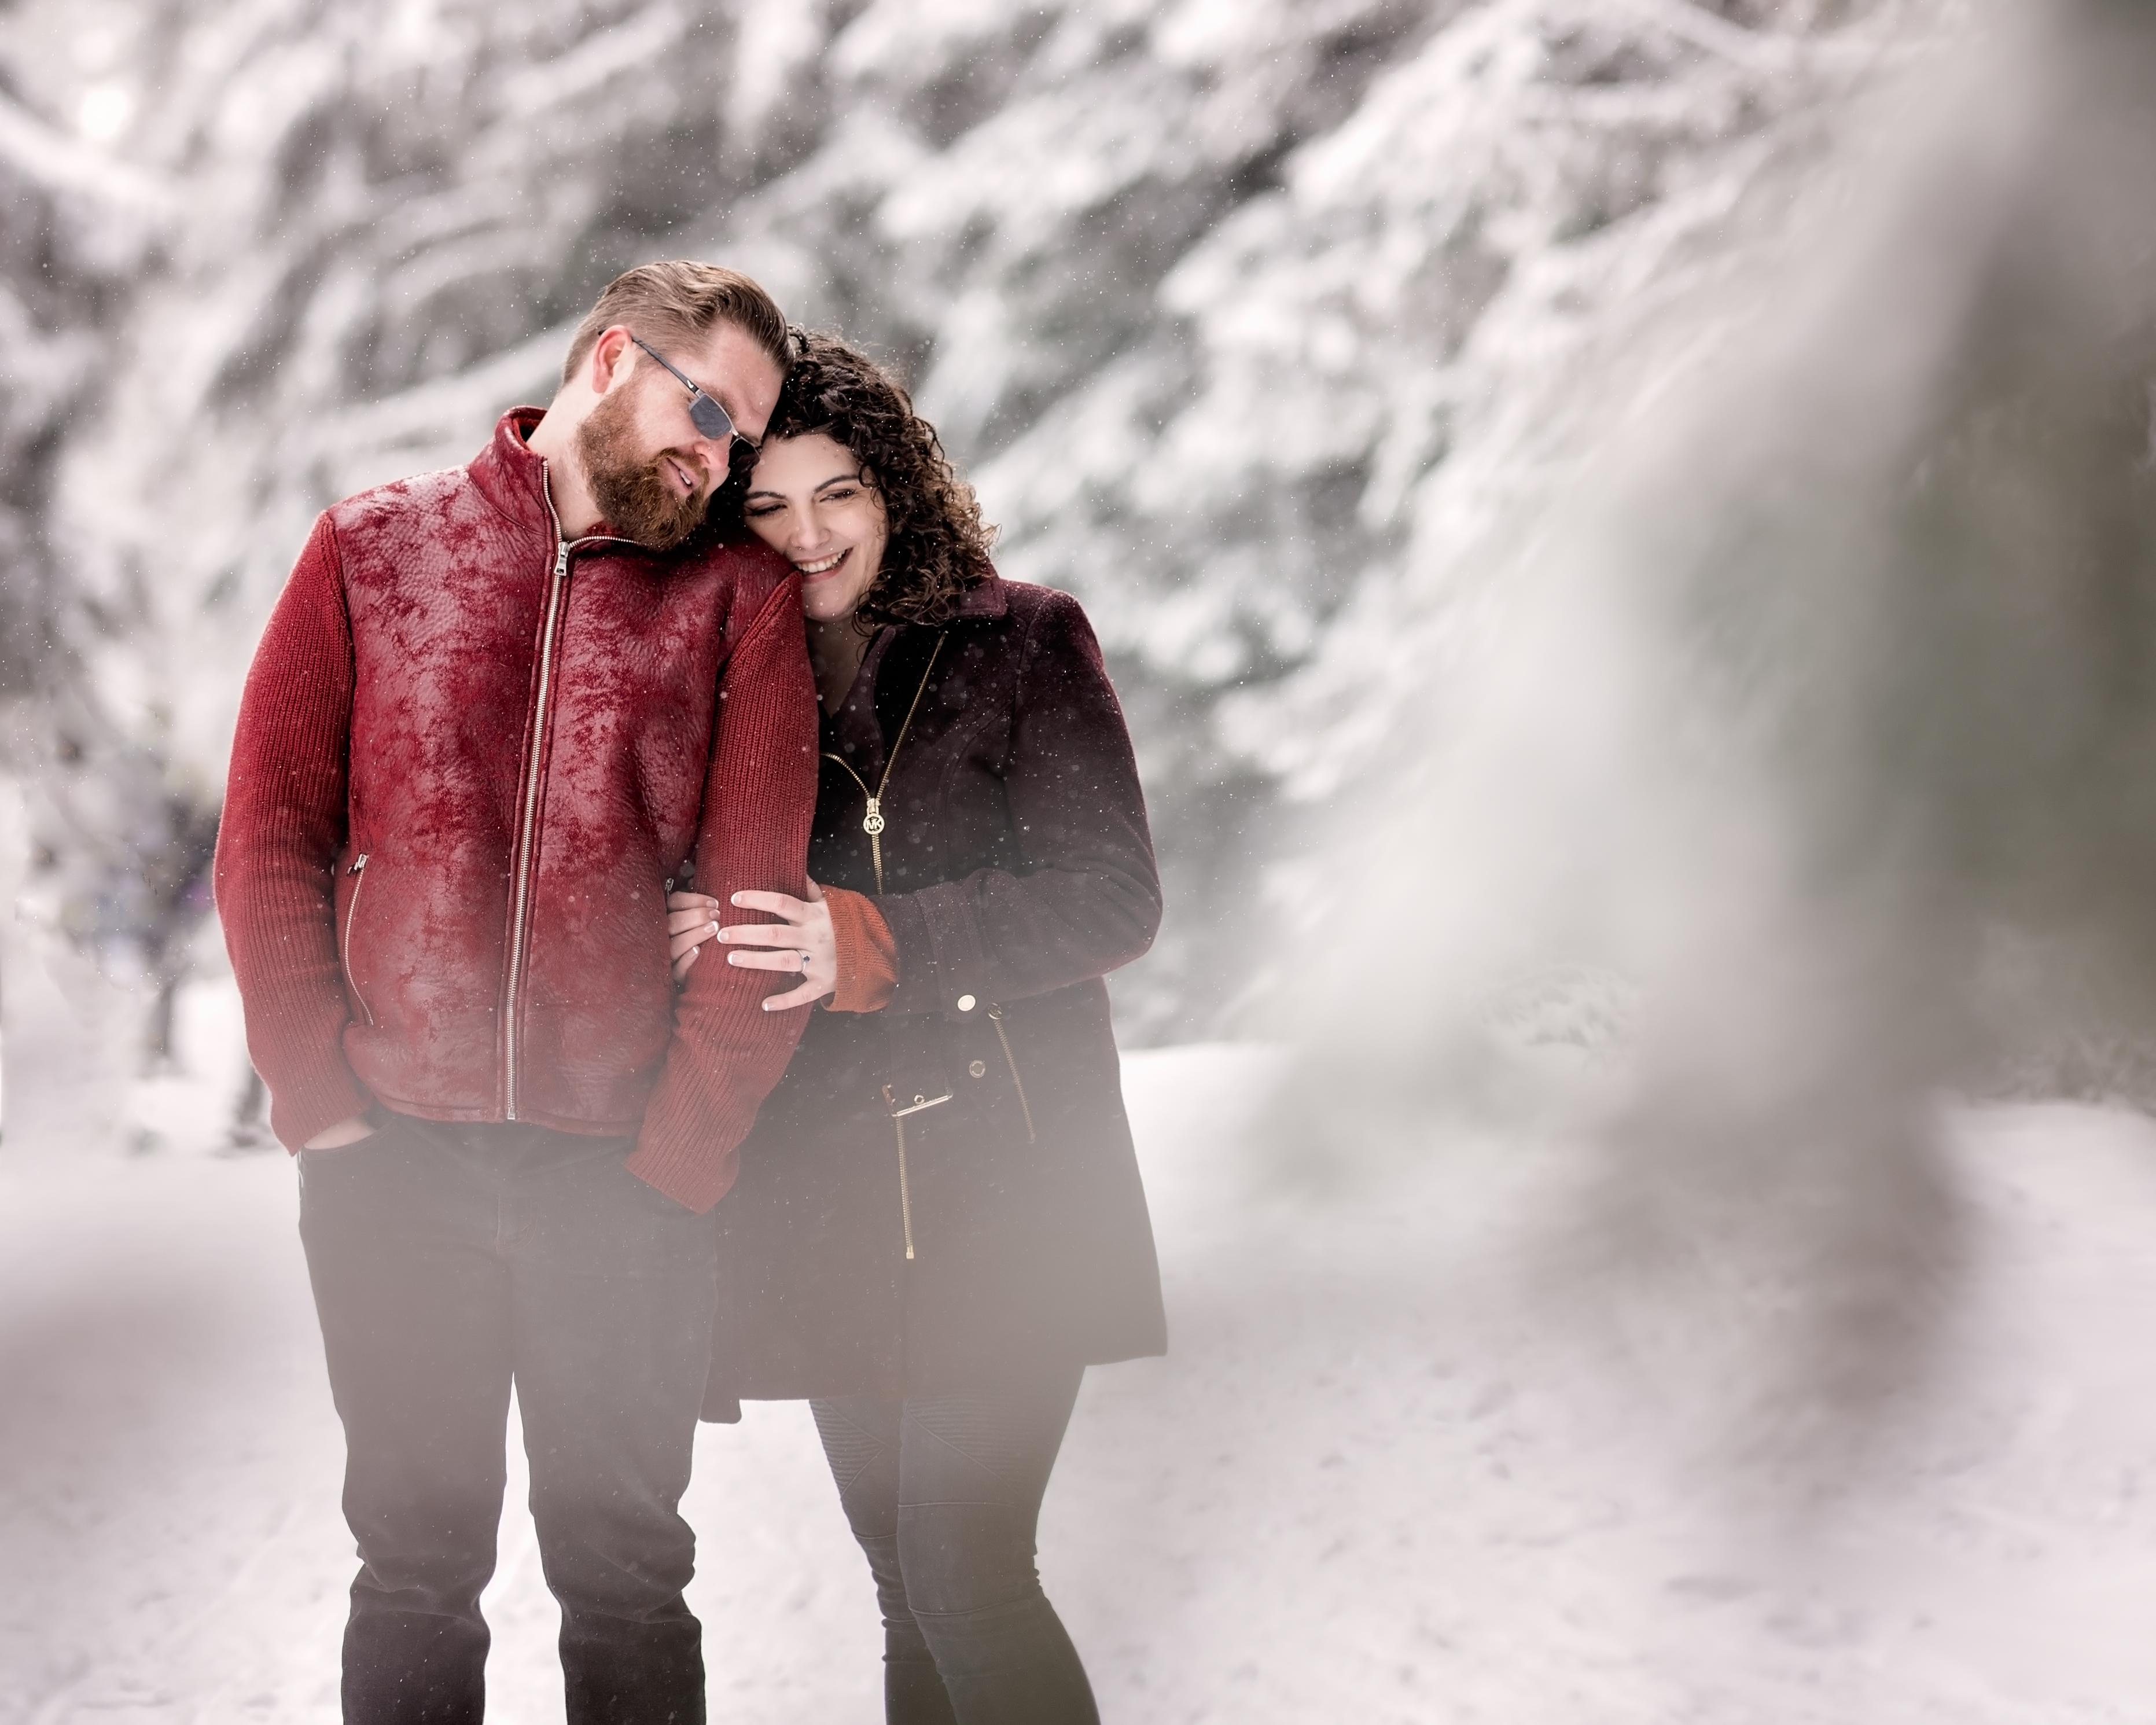 Lindsey and Hunter’s Snowy Engagement Session